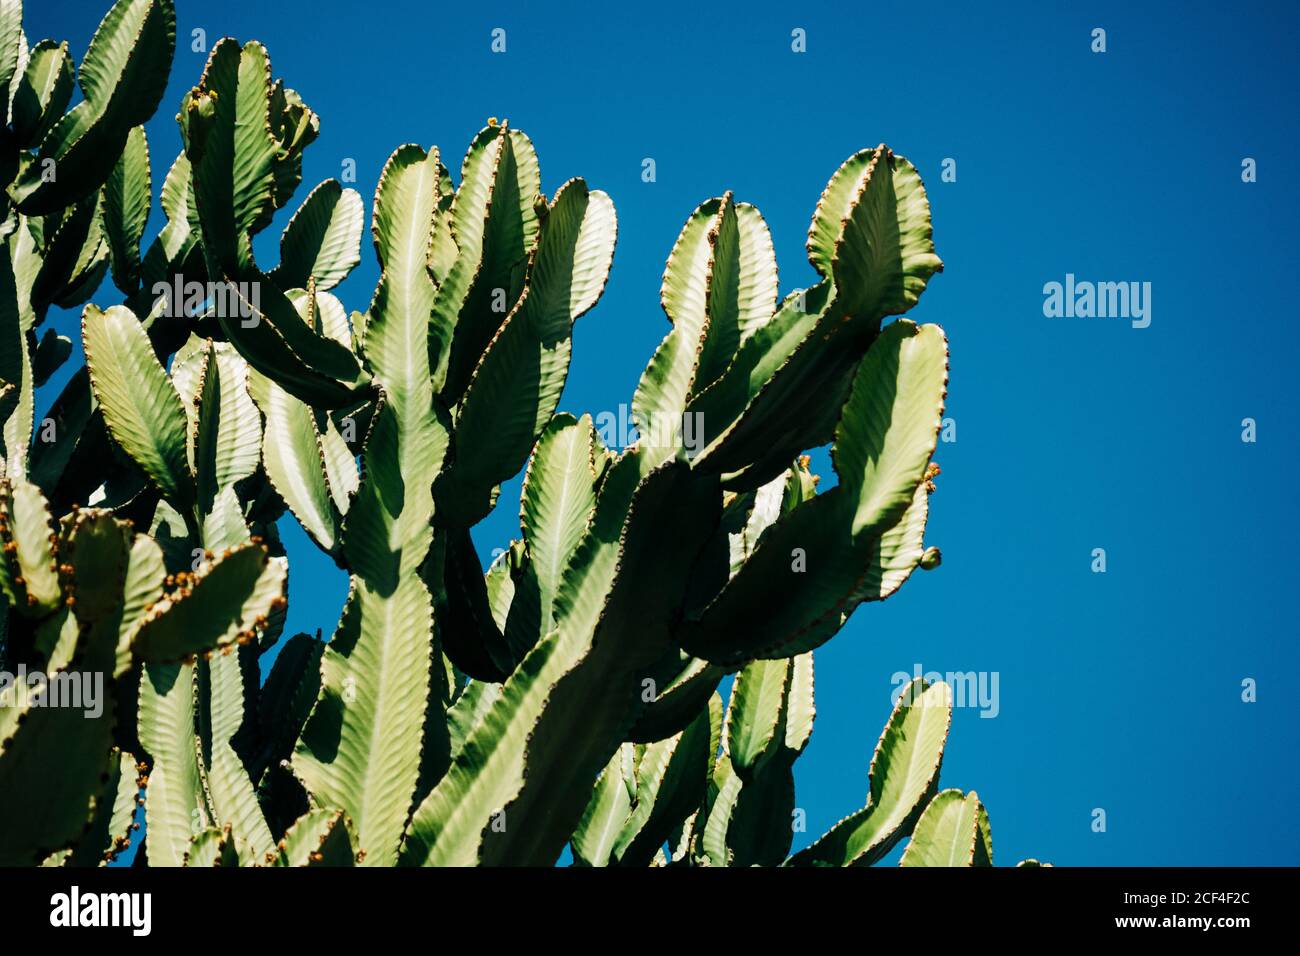 Close-up cactus with tall green stems growing in the nature against a clear blue sky on a sunny day Stock Photo